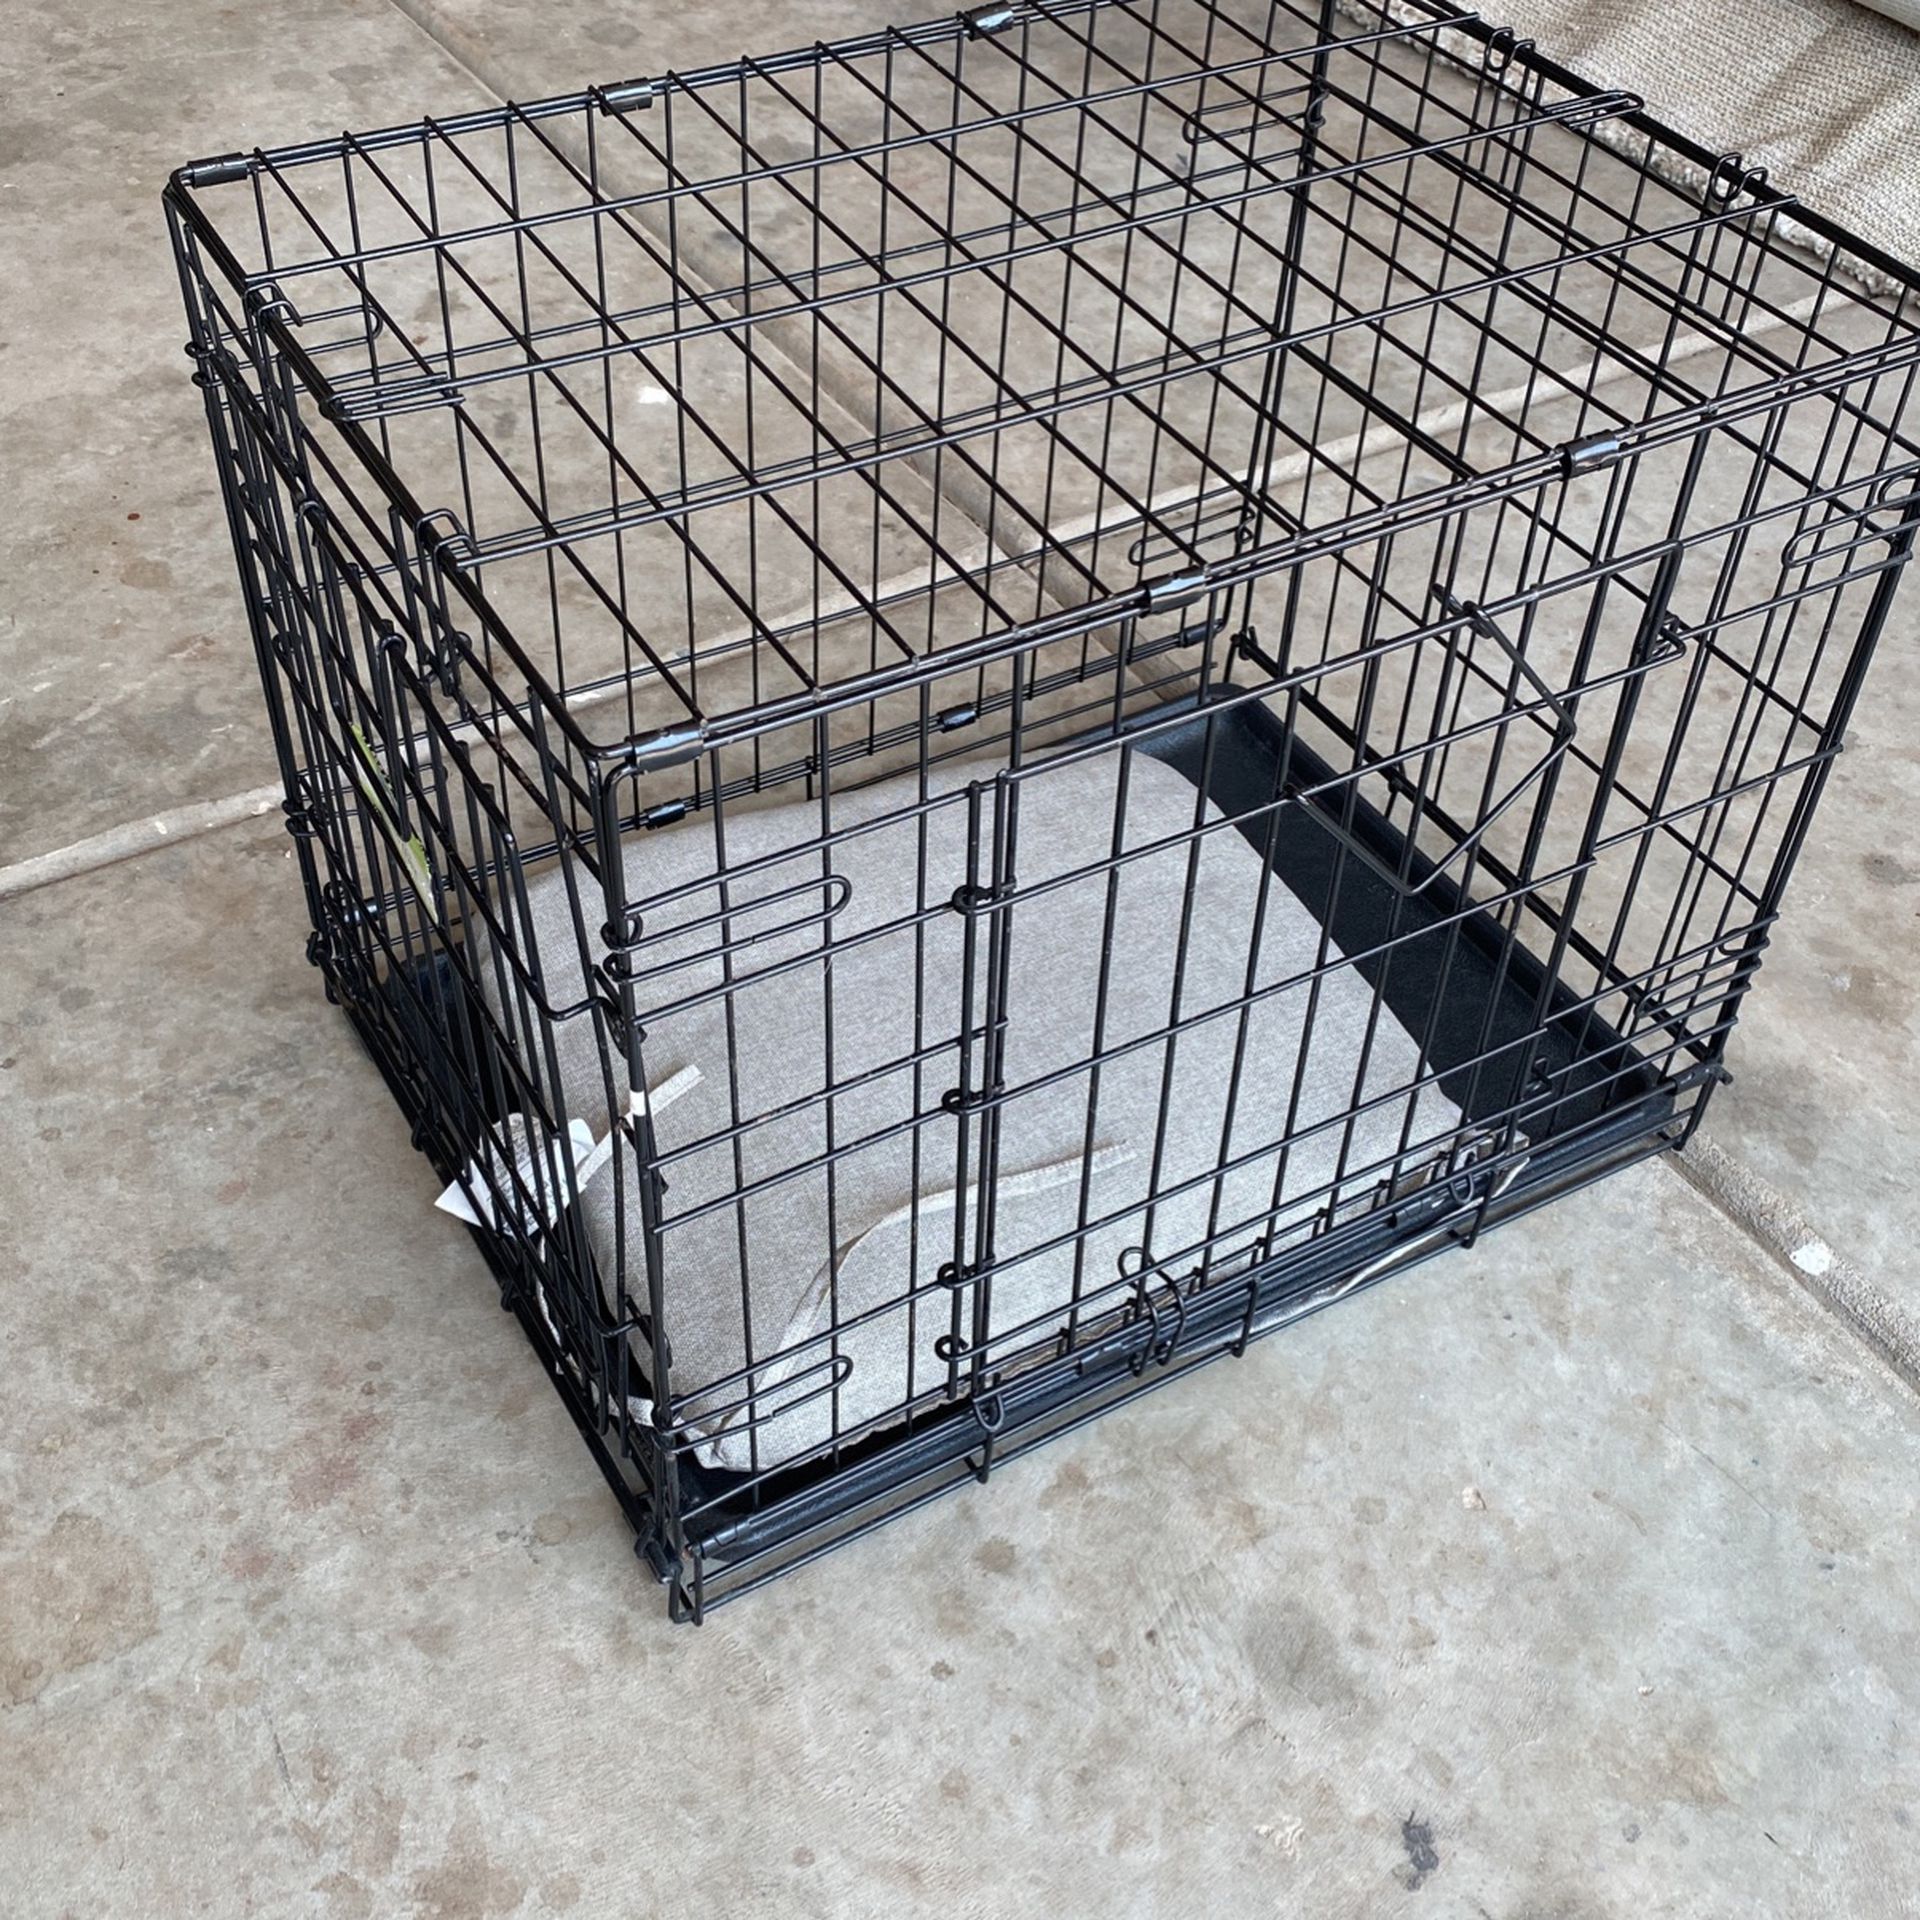 Small Dog/pet Kennel